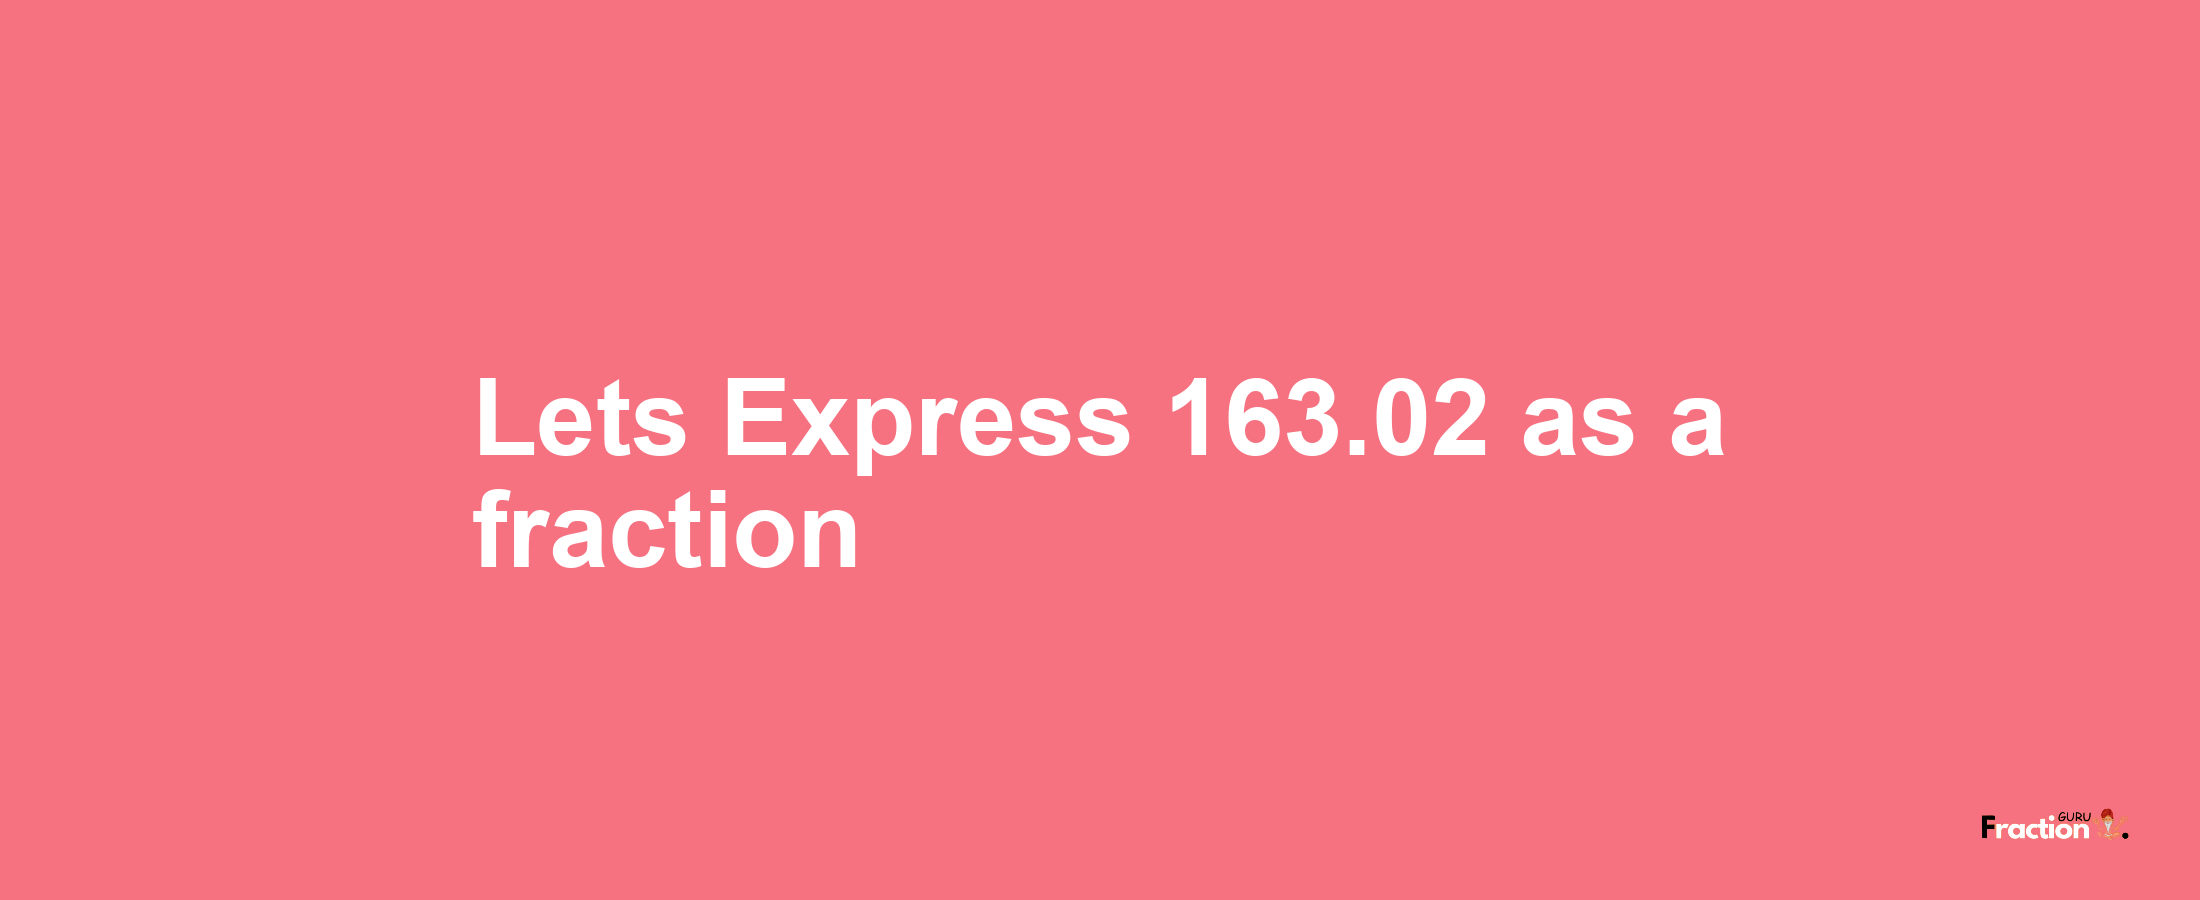 Lets Express 163.02 as afraction